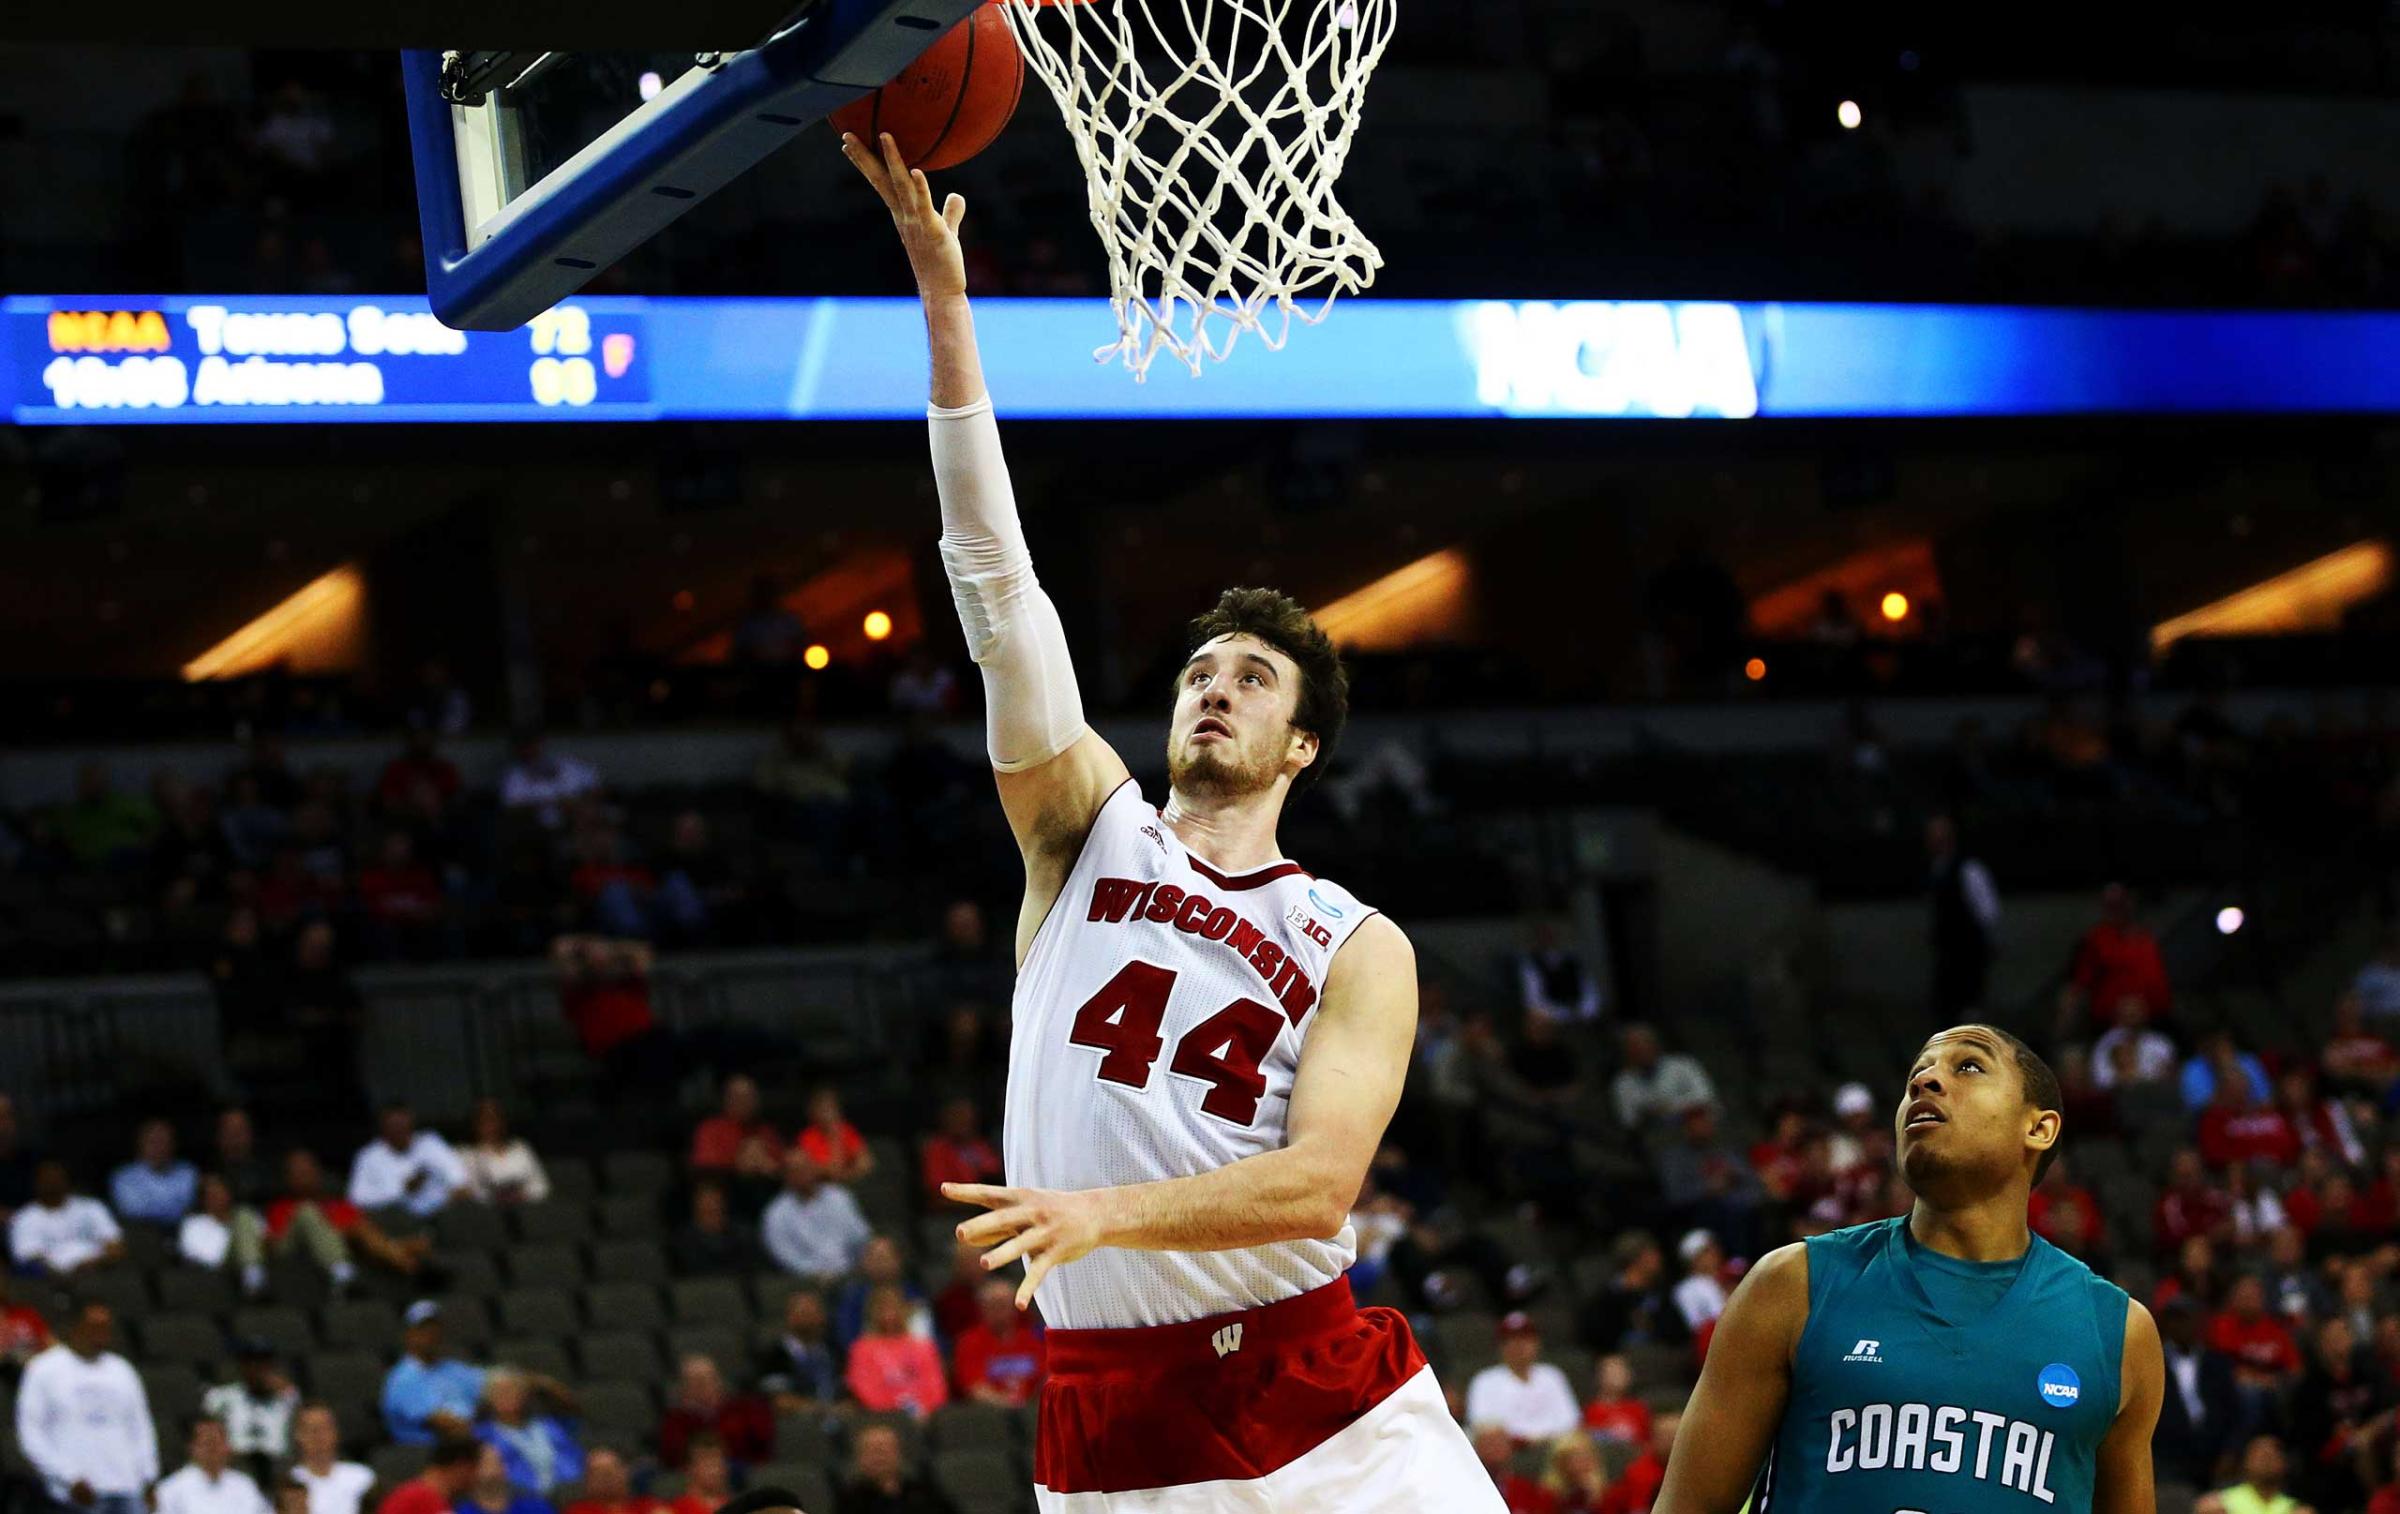 Frank Kaminsky of the Wisconsin Badgers shoots against the Coastal Carolina Chanticleers in the second half during the second round of the 2015 NCAA Men's Basketball Tournament at the CenturyLink Center in Omaha, Neb. on March 20, 2015.